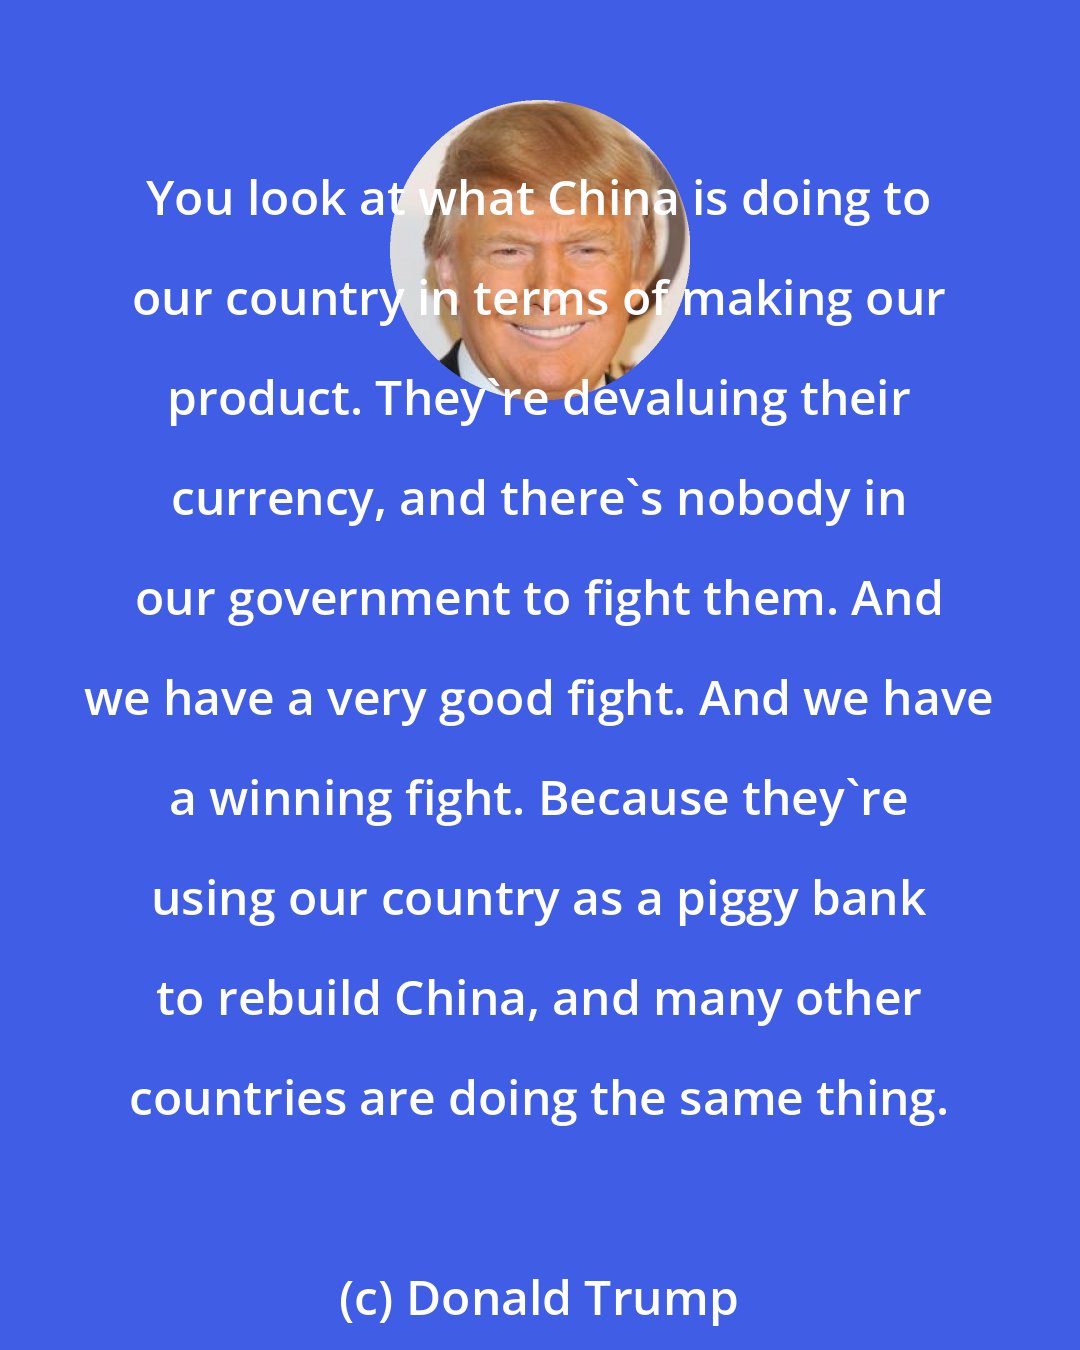 Donald Trump: You look at what China is doing to our country in terms of making our product. They're devaluing their currency, and there's nobody in our government to fight them. And we have a very good fight. And we have a winning fight. Because they're using our country as a piggy bank to rebuild China, and many other countries are doing the same thing.